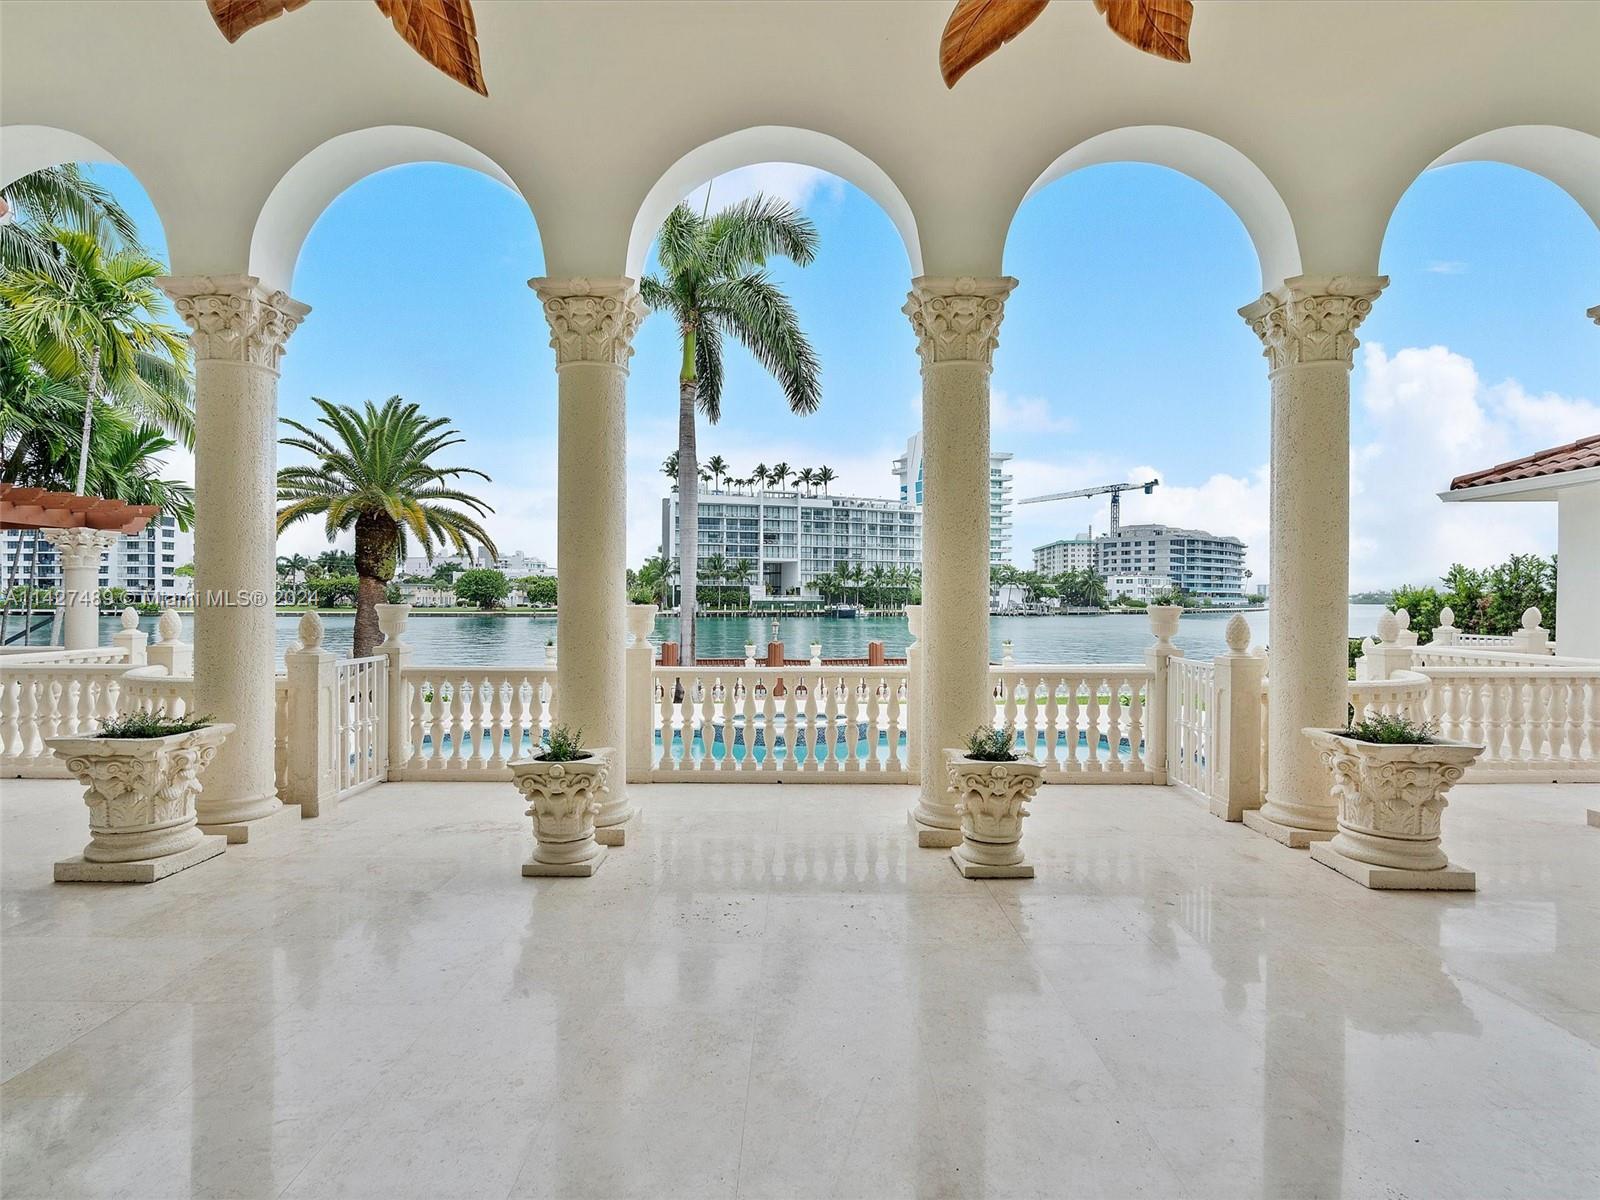 PRESTIGIOUS GATED COMMUNITY OF BAL HARBOUR VILLAGE!!! 100 FEET OF EXCLUSIVE WATERFRONT IN A 20,900 SQ FT LOT, OPEN VIEWS, ACCESS TO THE OCEAN, HOUSE IS OVER 7,000 SQ FT, HIGH 20 FEET CEILINGS, 3 CAR GARAGE, 5 BEDROOMS PLUS STATE OF THE ART LIBRARY, DINING ROOM, BREAKFAST ROOM, 6 PLUS HALF BATH .
ENTRANCE TROUGH COLLINS AVE AND 102 ST, (HARBOUR WAY)ONLY.VACANT AND EASY TO SHOW